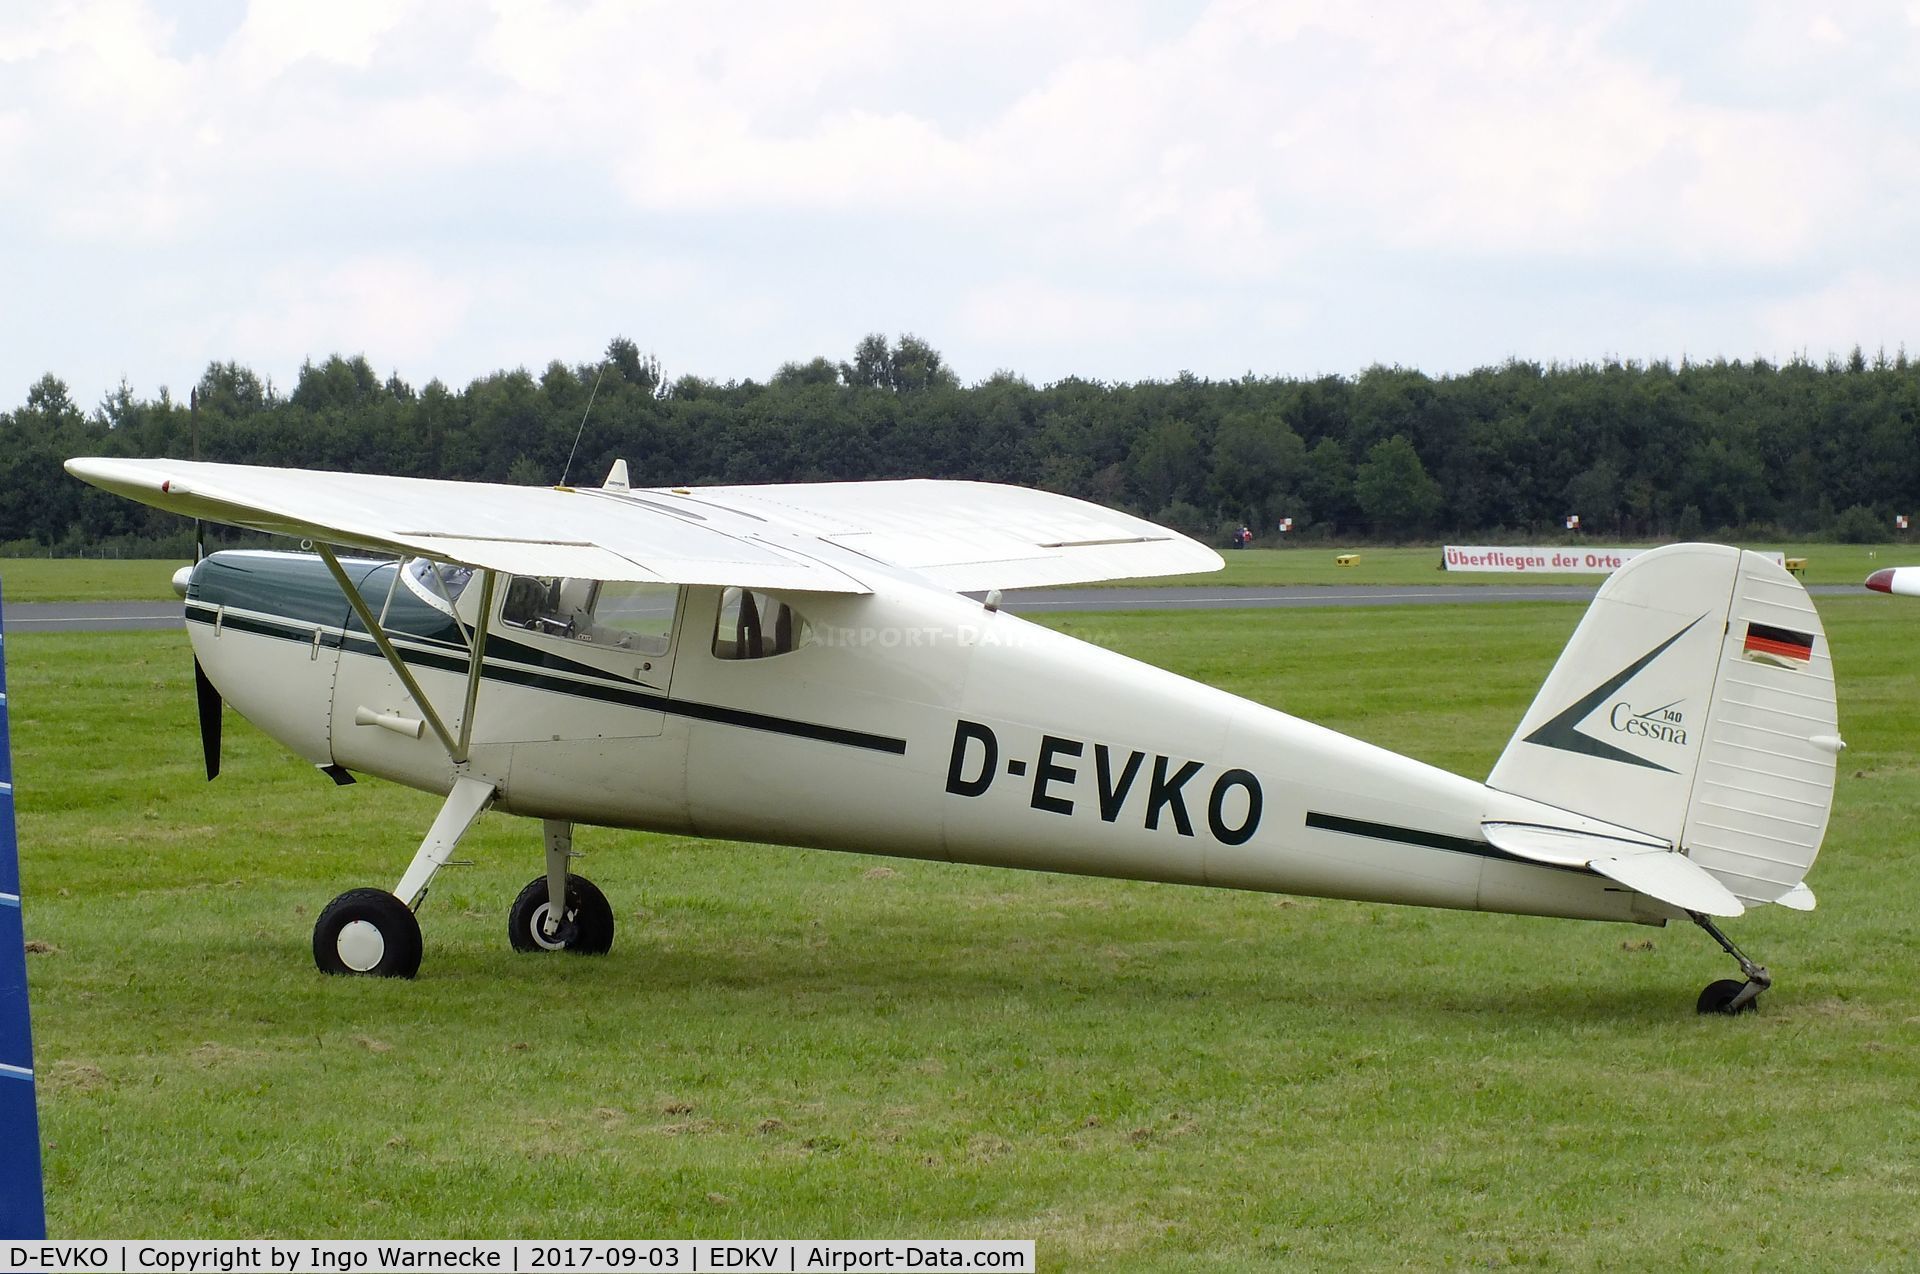 D-EVKO, 1946 Cessna 140 C/N 8936, Cessna 140 at the Dahlemer Binz 60th jubilee airfield display